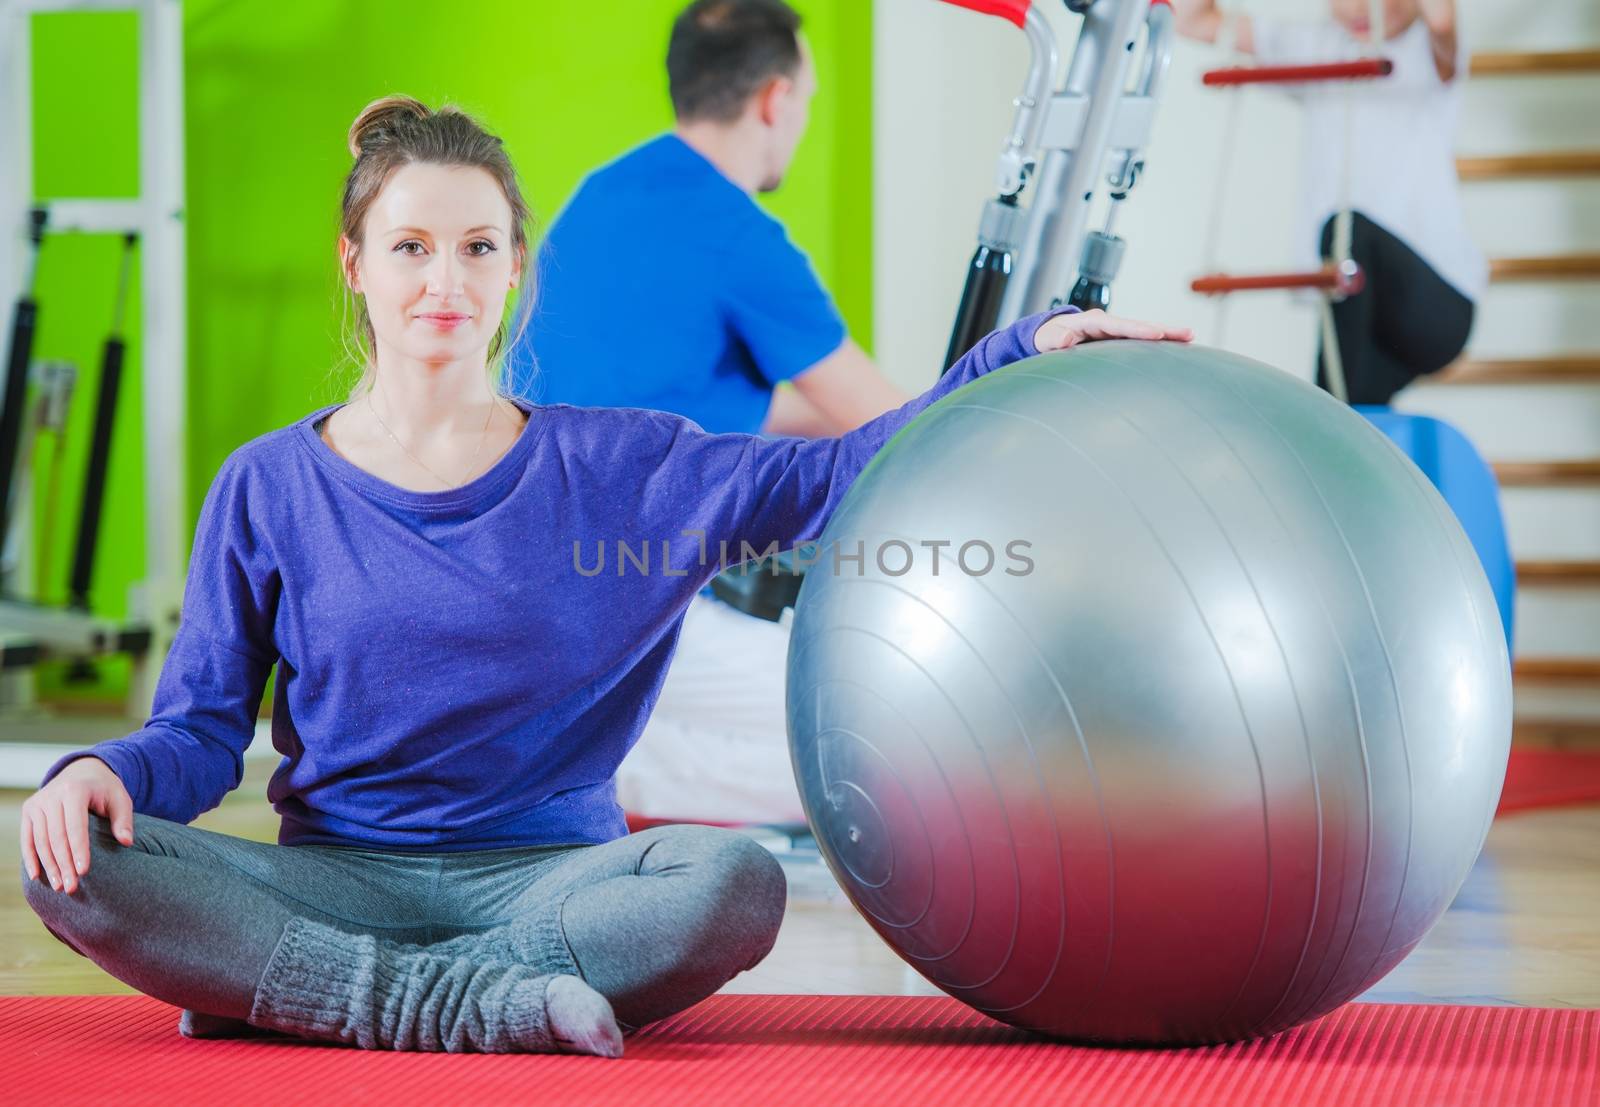 Exercise Ball Exercises by welcomia